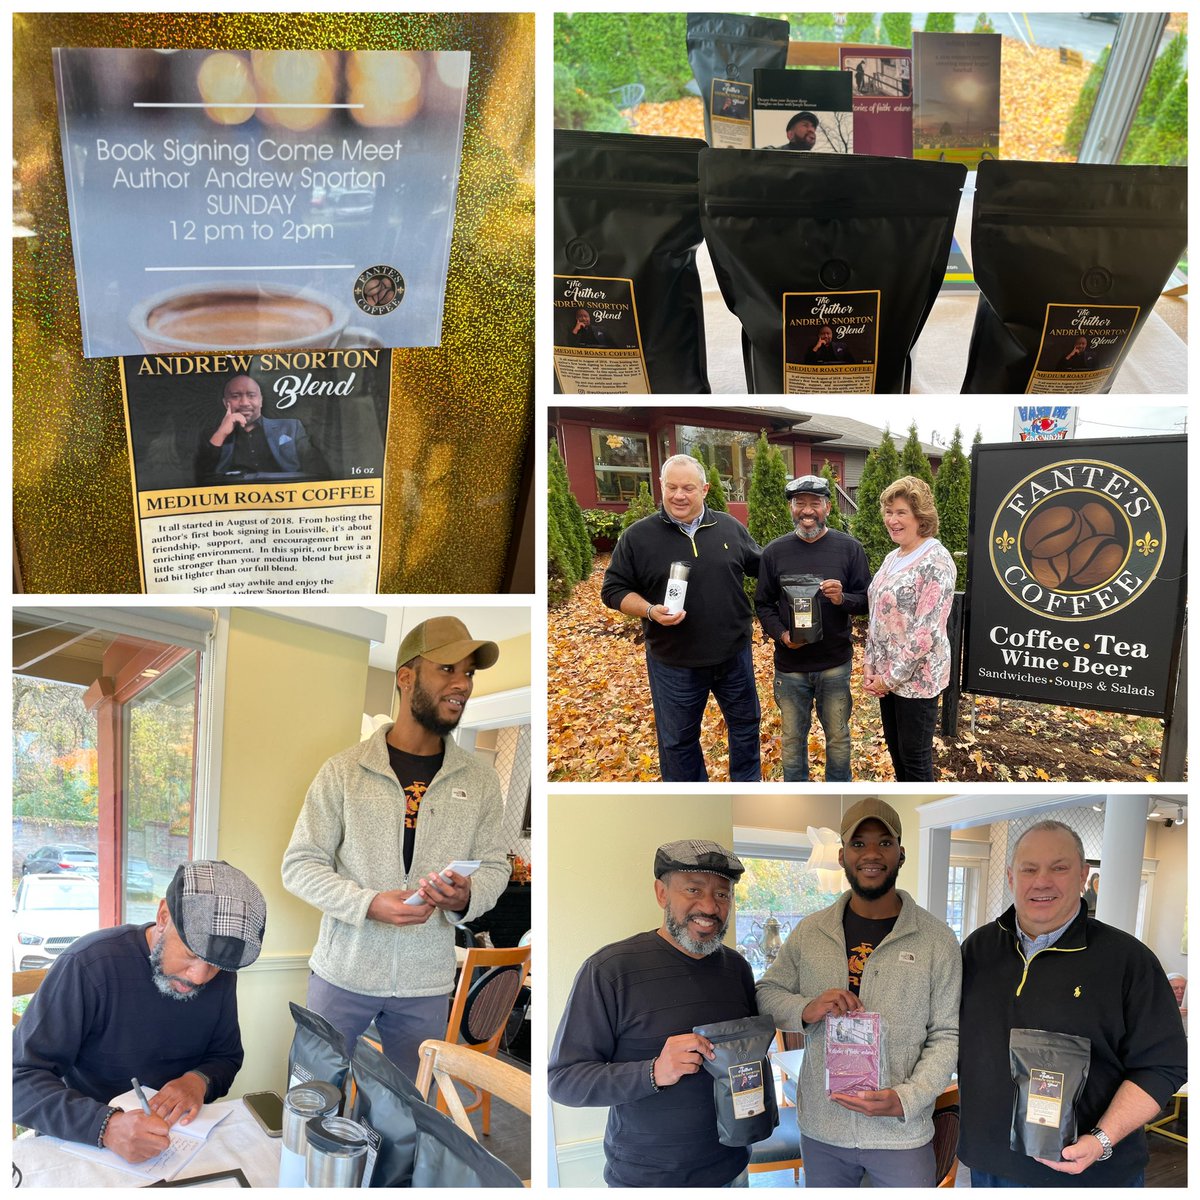 Snapshots of a great experience at @FanteCoffee on Oct 30th; a book signing featuring all my books AND dropping the drip on the #AuthorASnortonBlend coming soon!  #books #coffee #booksandcoffee #FantesCoffee #AuthorASnorton #teamwork #collaboration #author #goodpeople #goodtimes